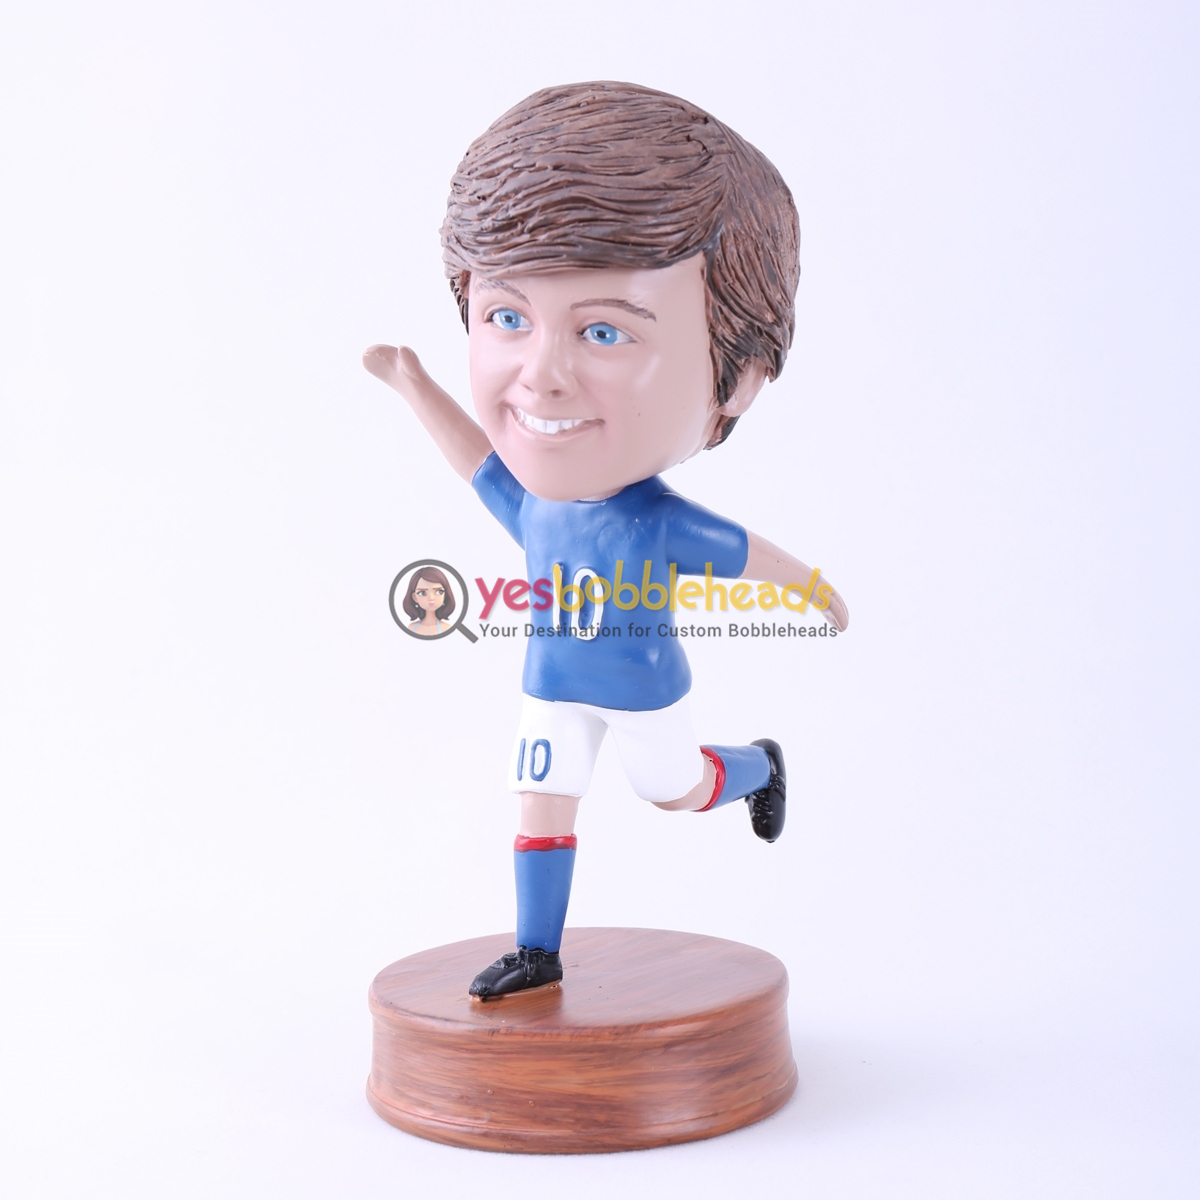 Picture of Custom Bobblehead Doll: Man in Kicking Posture